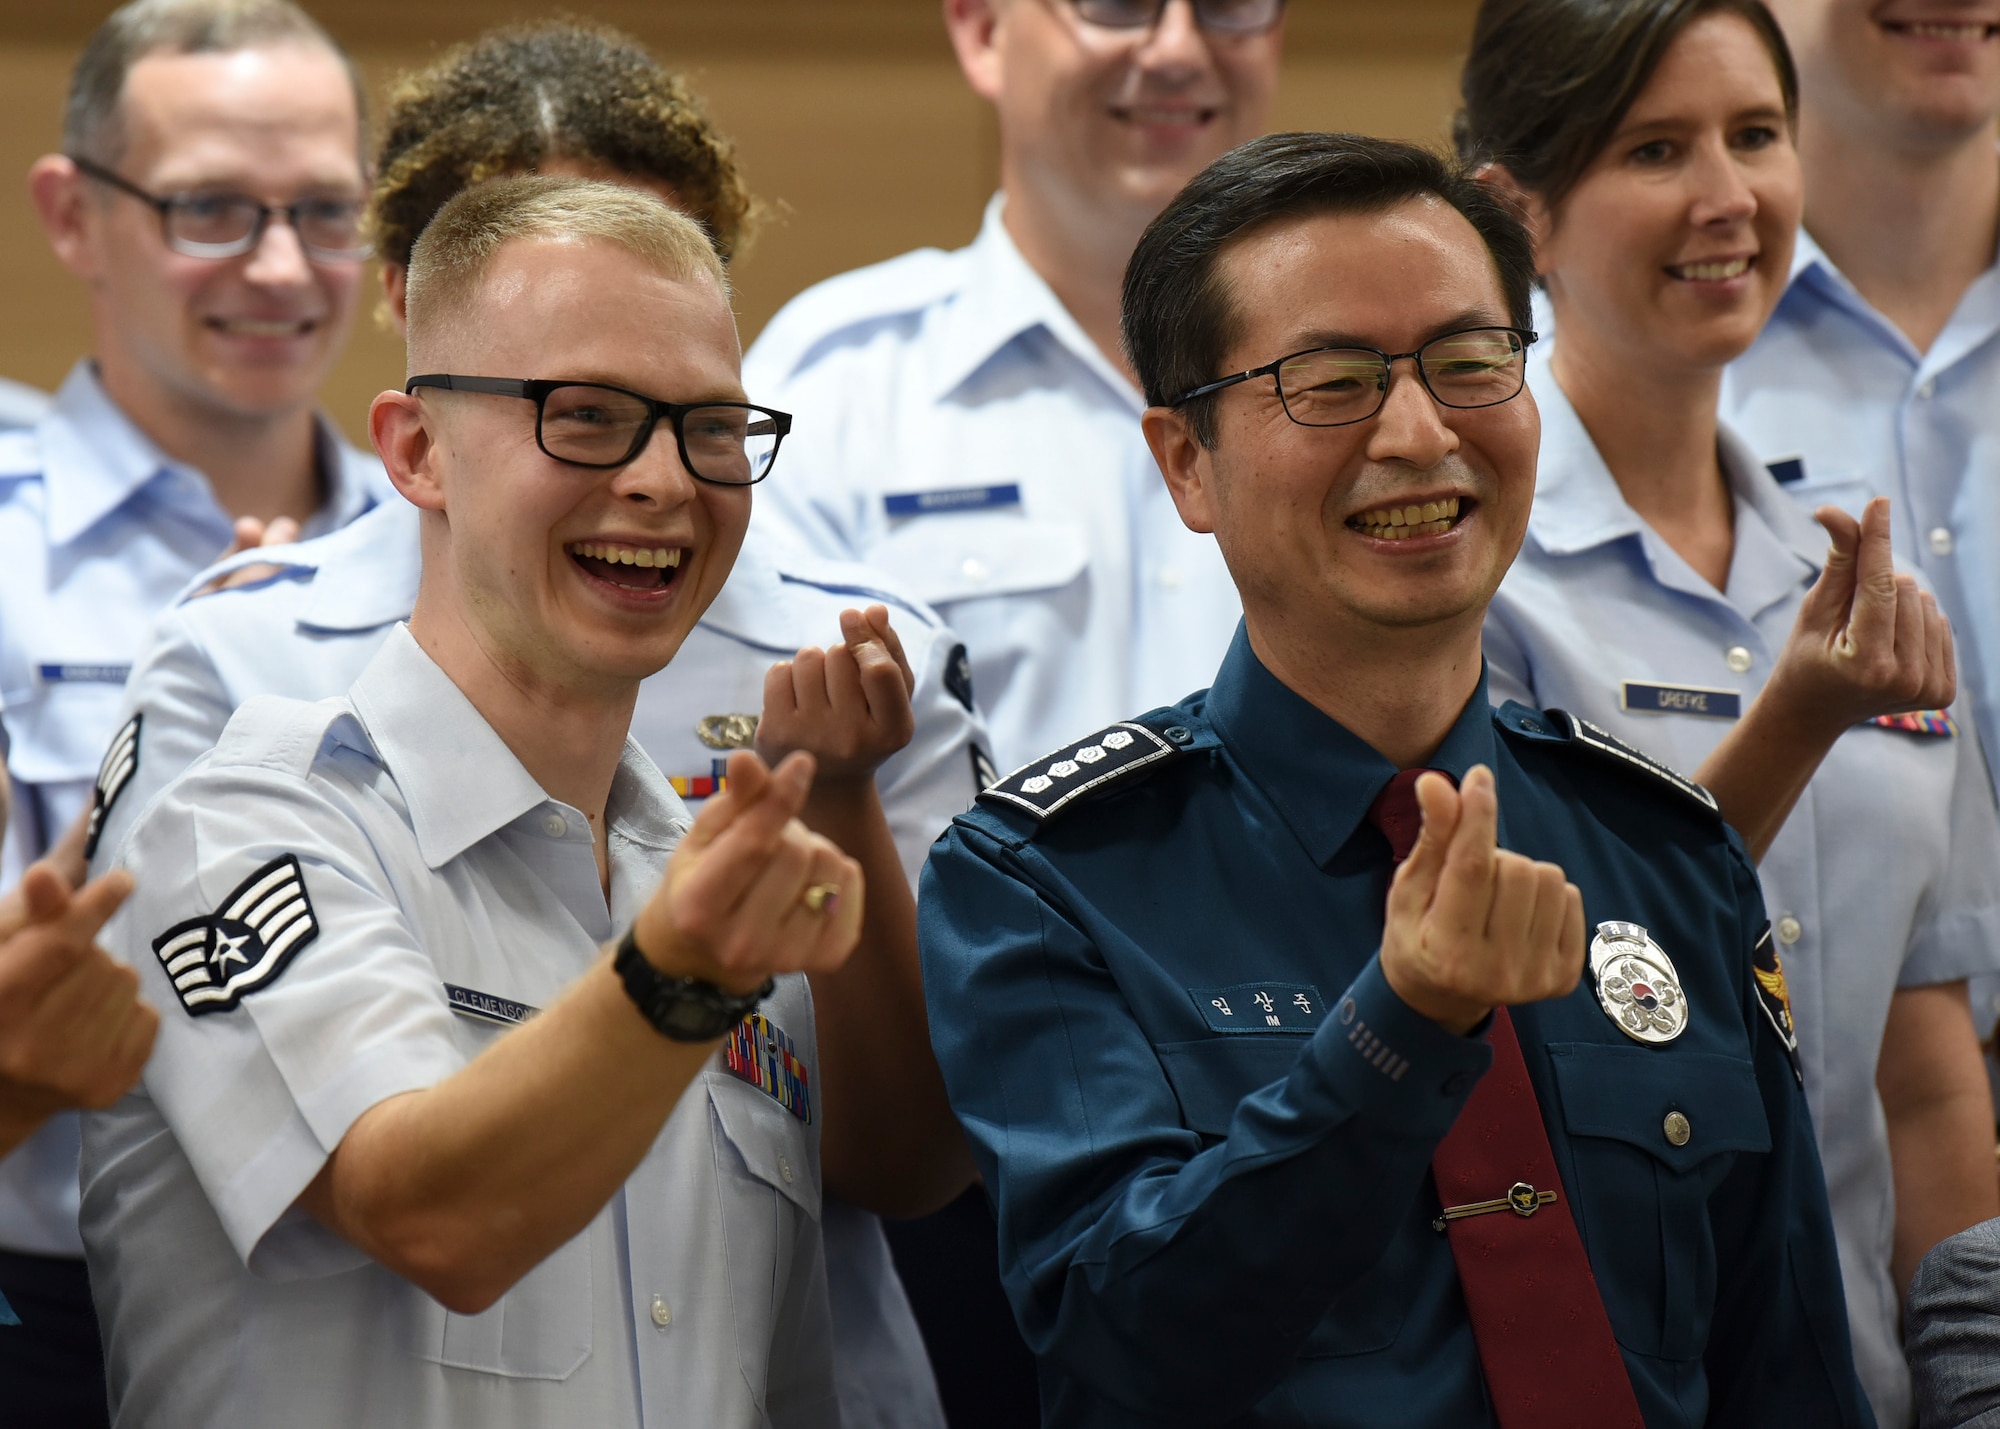 Sang-joon Lim, Gunsan Korean National Police chief, creates the hand heart symbol along with Staff Sgt. Andrew Clemenson, U.S. Air Force Band of the Pacific drummer, and other band members in Gunsan City, Republic of Korea, Sept. 24, 2019. The bands mission is to reinforce alliances, expand partnerships and build cross-cultural trust. (U.S. Air Force photo by Staff Sgt. Anthony Hetlage)